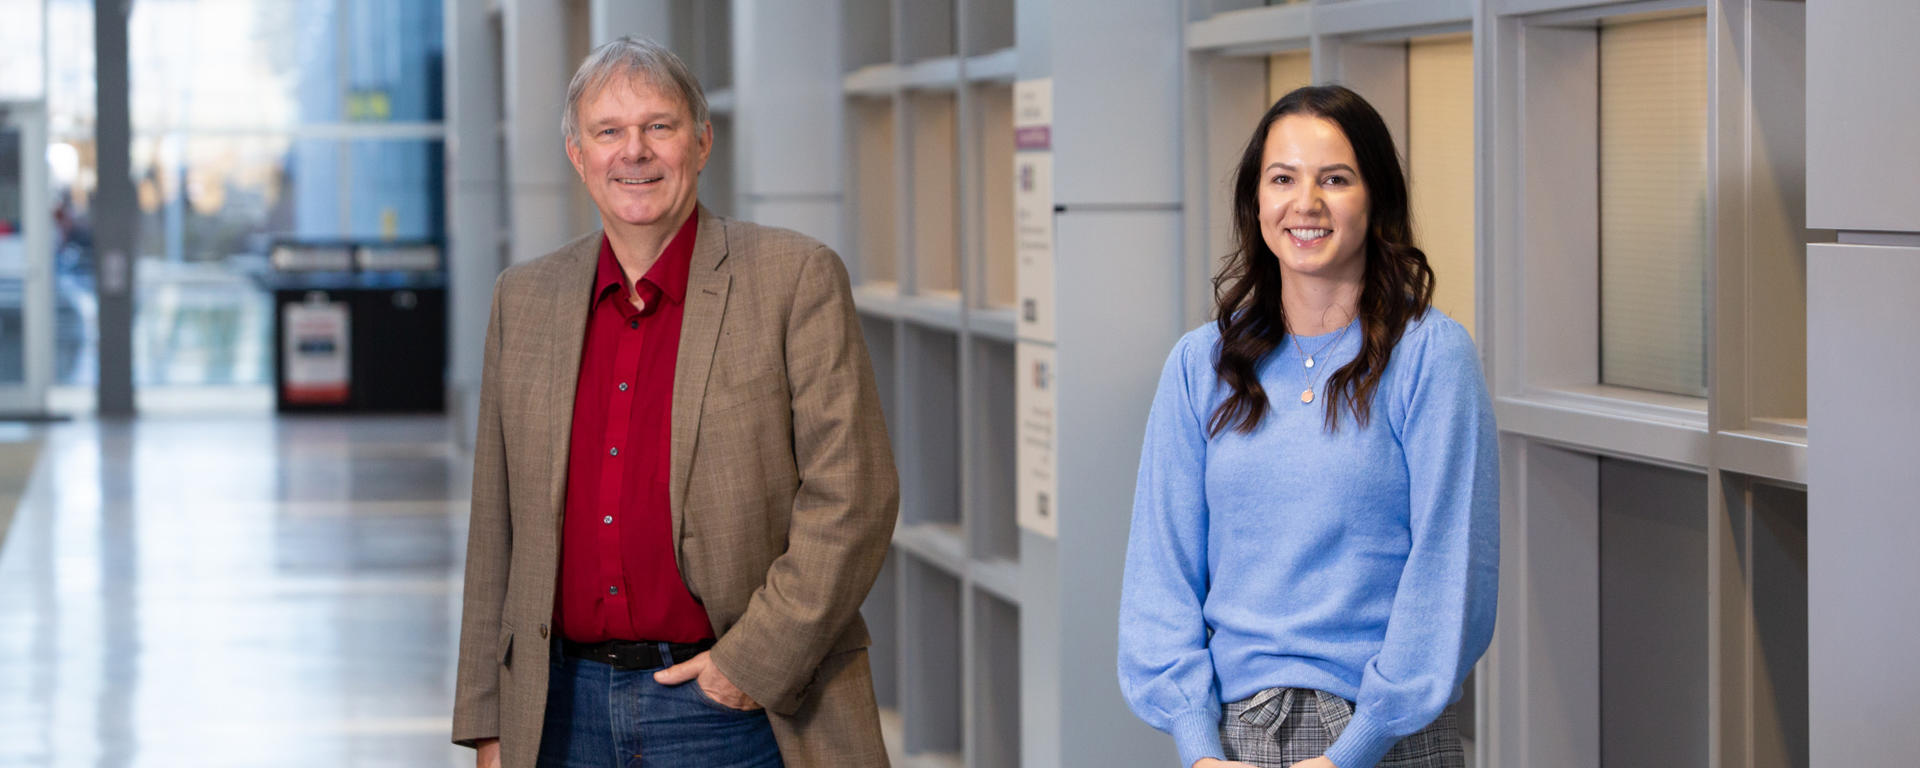 Herman Barkema and Dana Jelinski were part of a collaboration, led by John Conly, that developed a smartphone app that gives veterinarians guidelines for prescribing optimal antibiotic dosages.